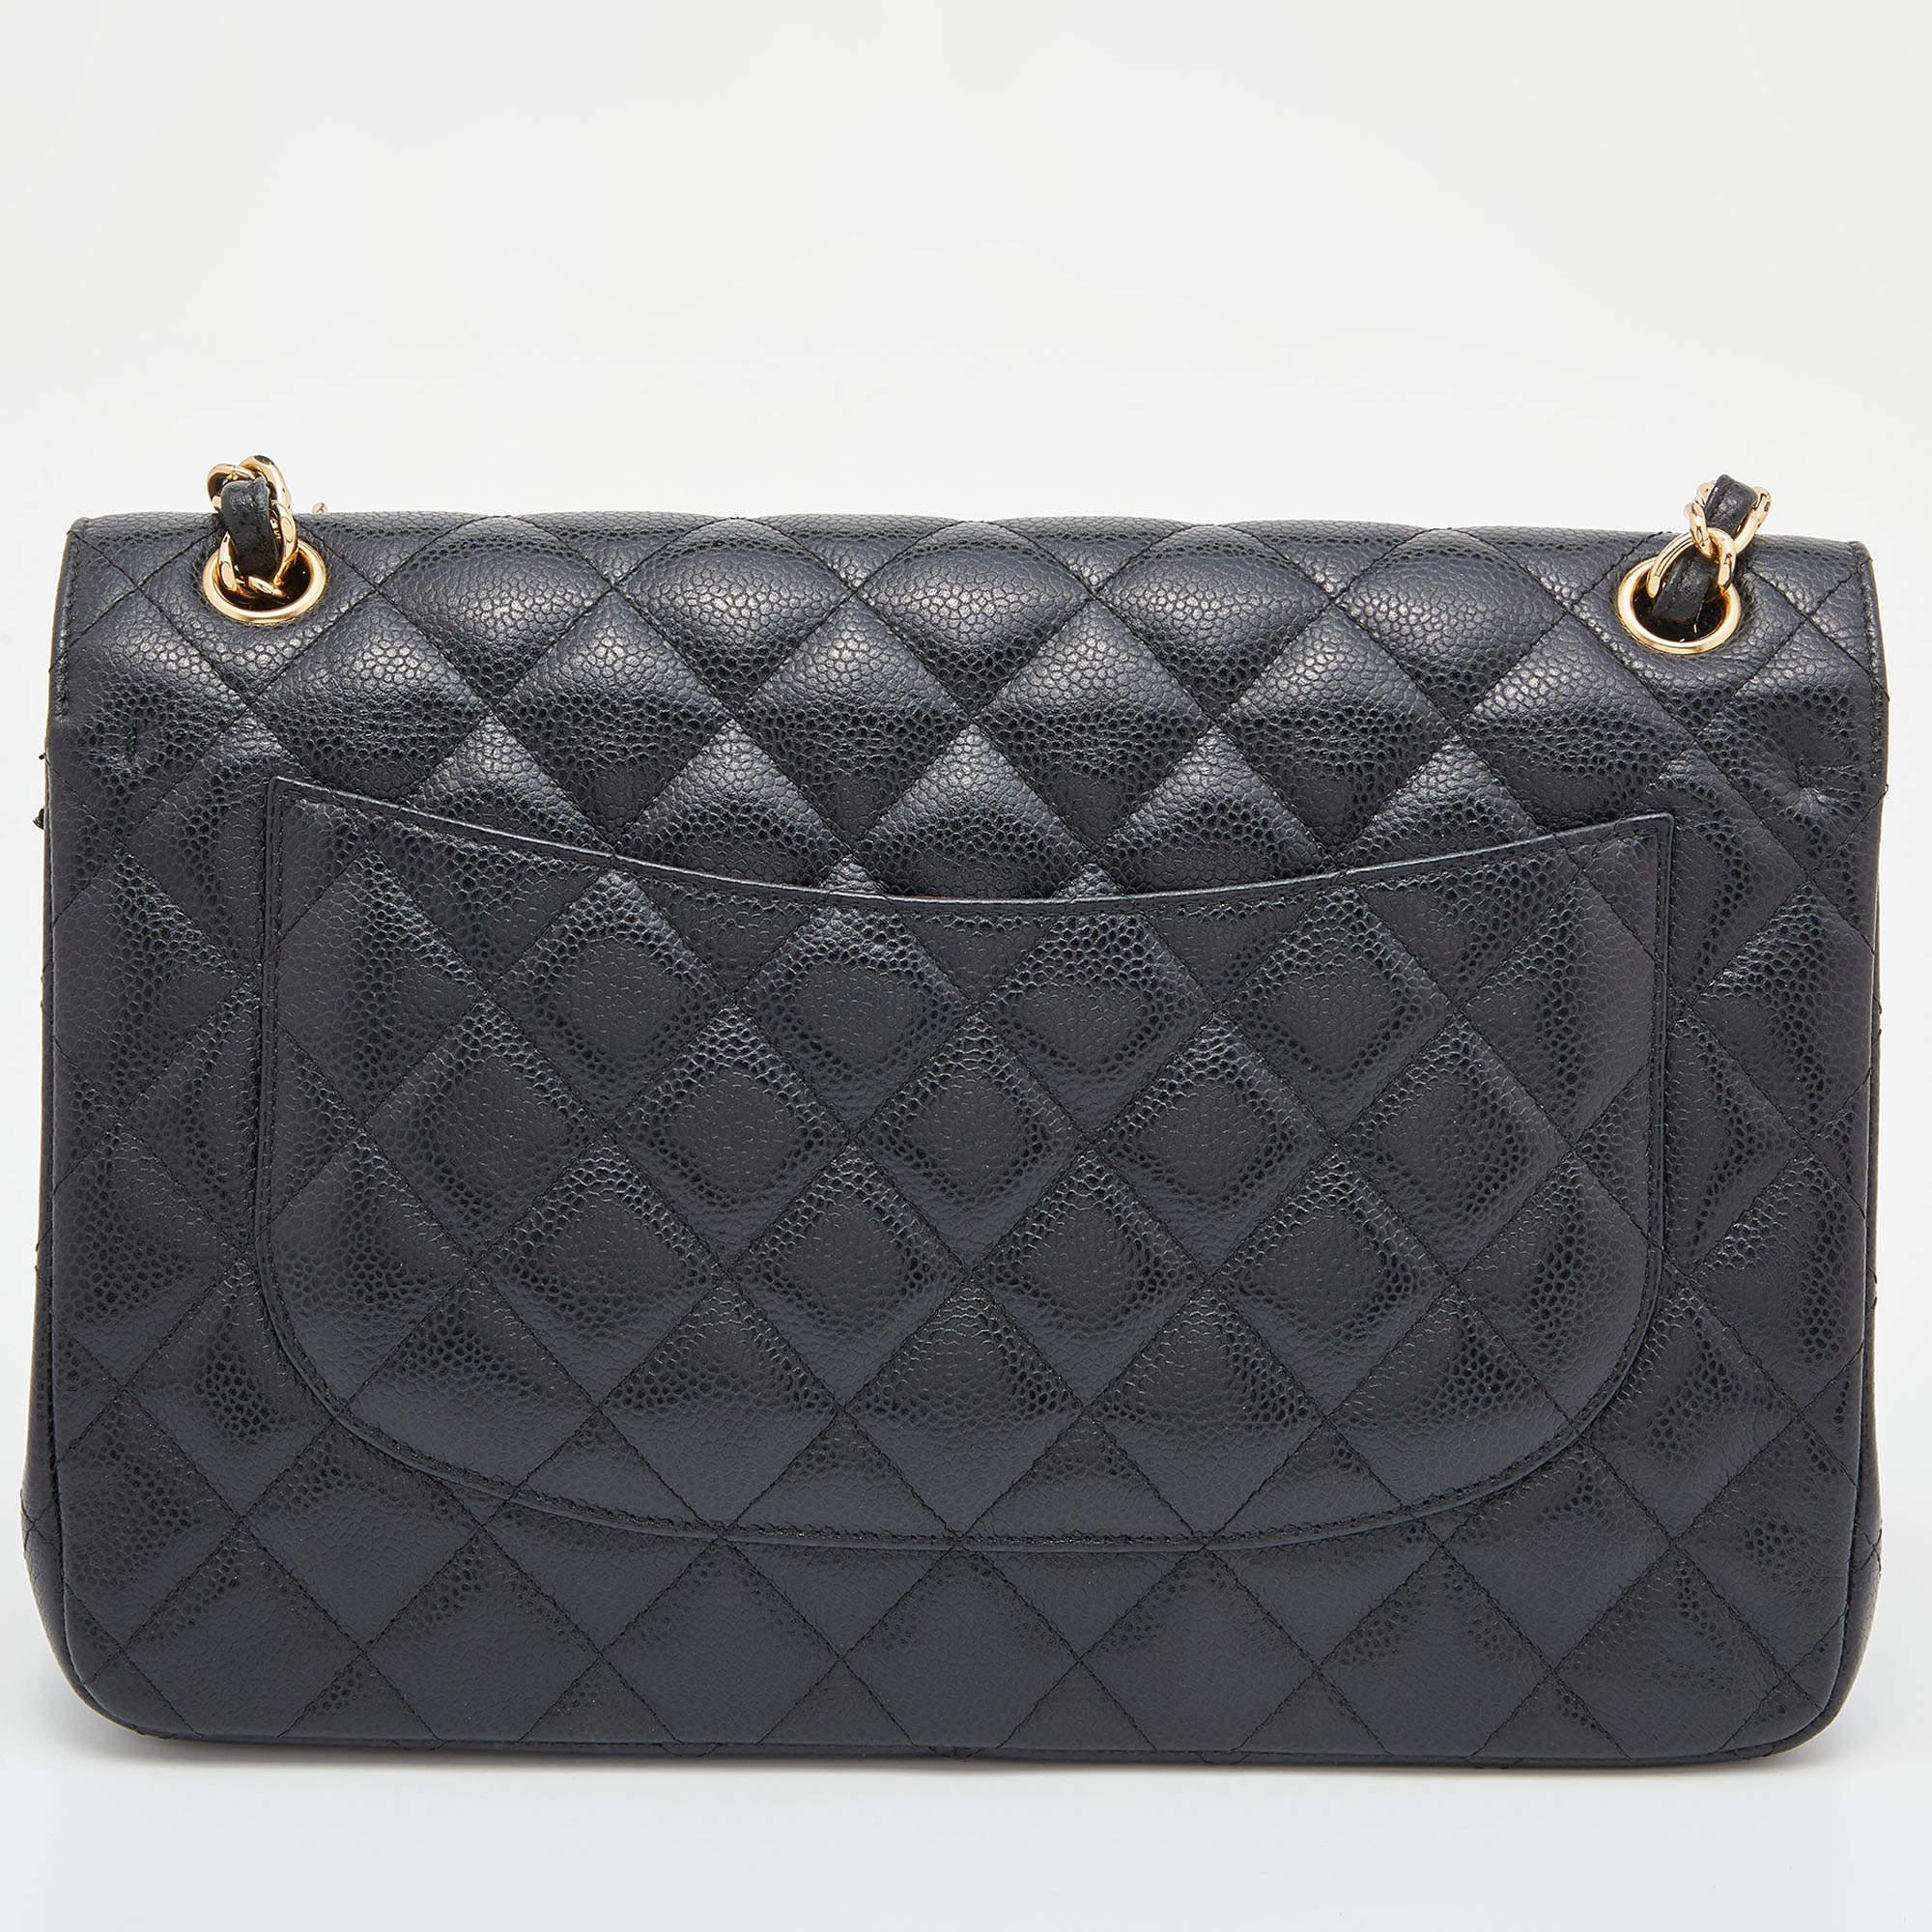 Chanel's luxurious Classic Flap bag is a must-have in a well-curated wardrobe! This stunning bag has a masterfully-crafted leather exterior with gold-tone hardware and the iconic CC logo on the front. This Jumbo Classic Double Flap is complete with